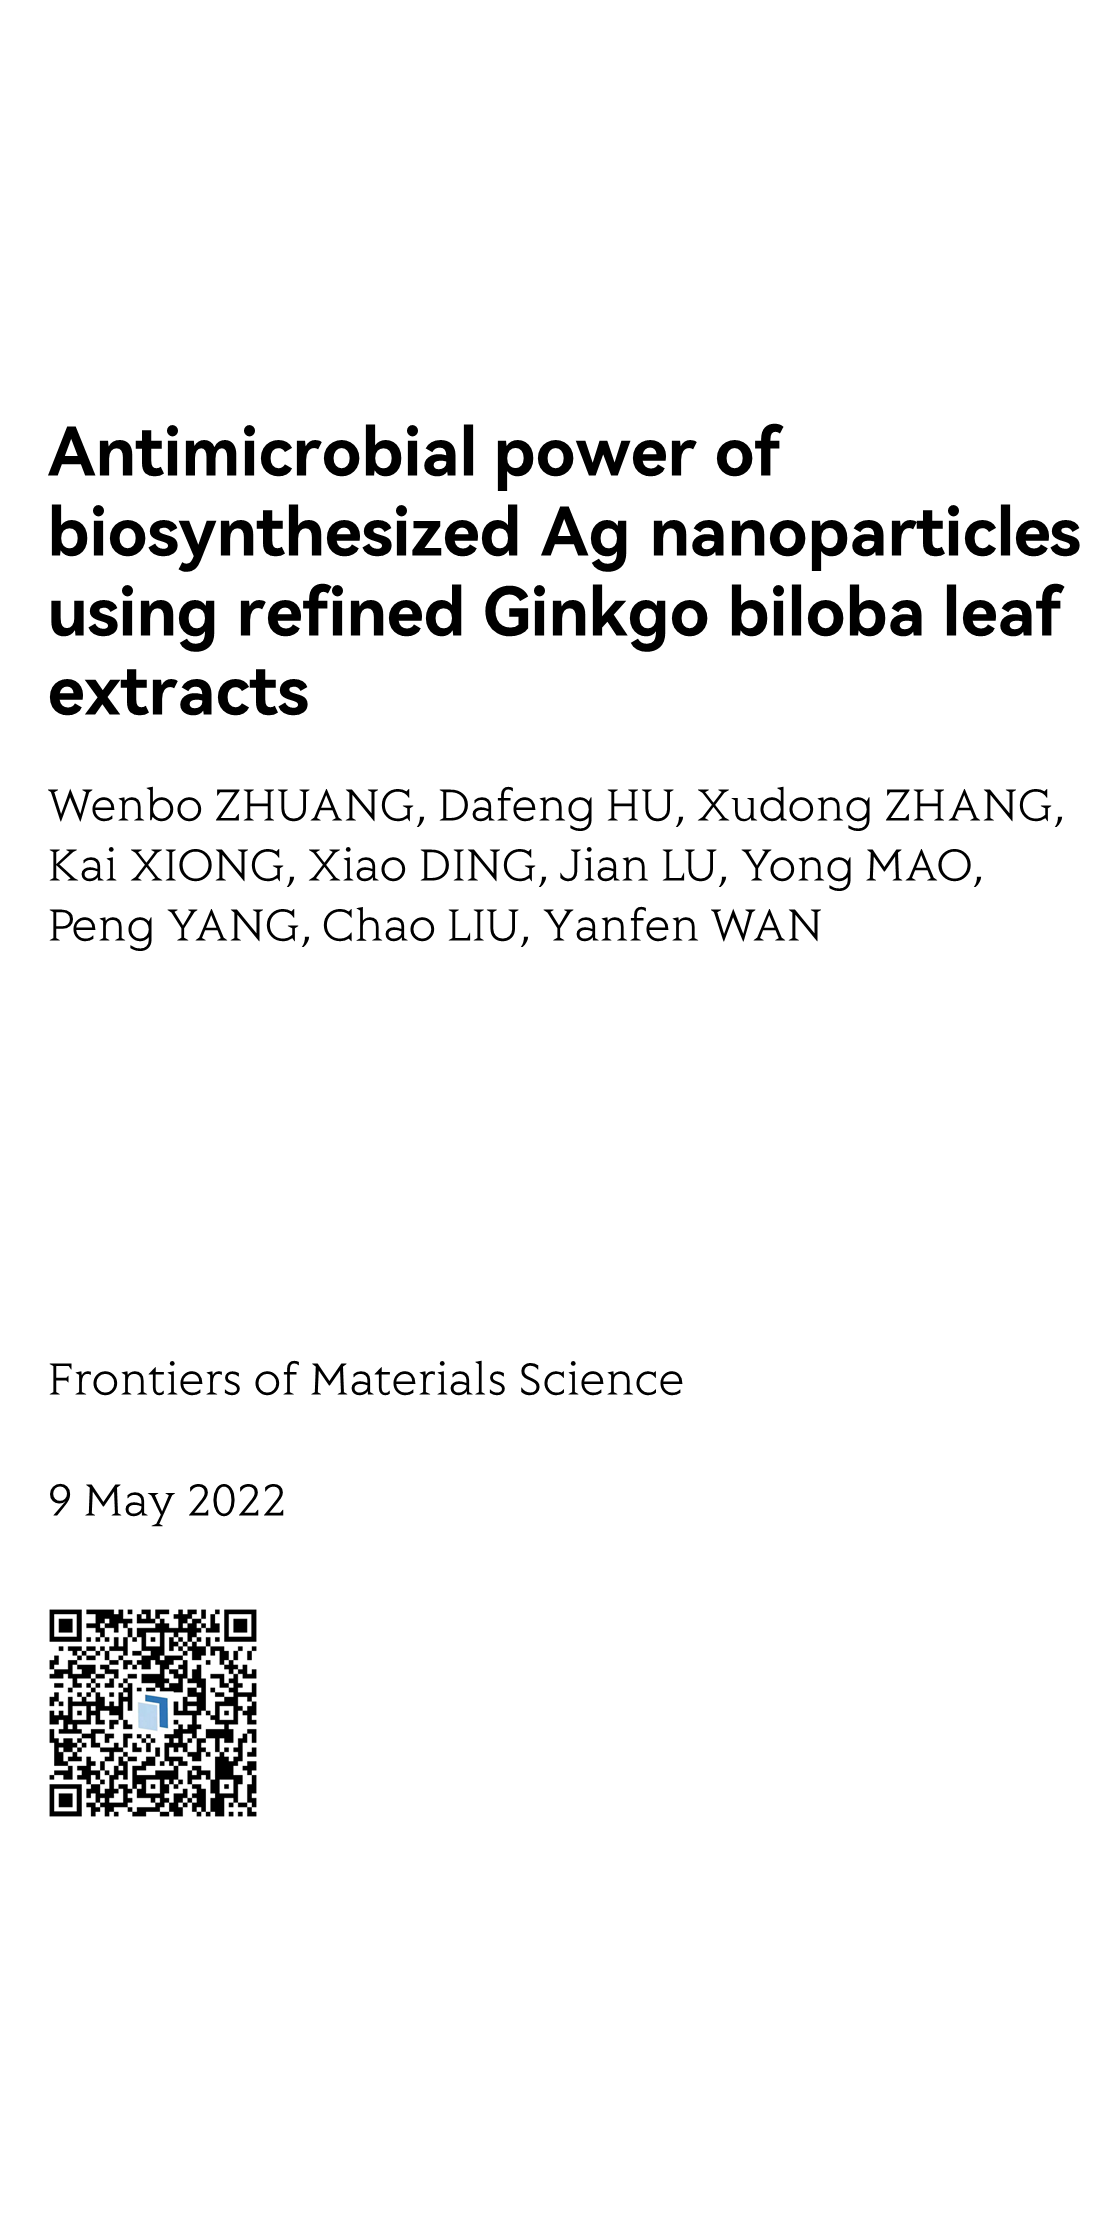 Antimicrobial power of biosynthesized Ag nanoparticles using refined Ginkgo biloba leaf extracts_1